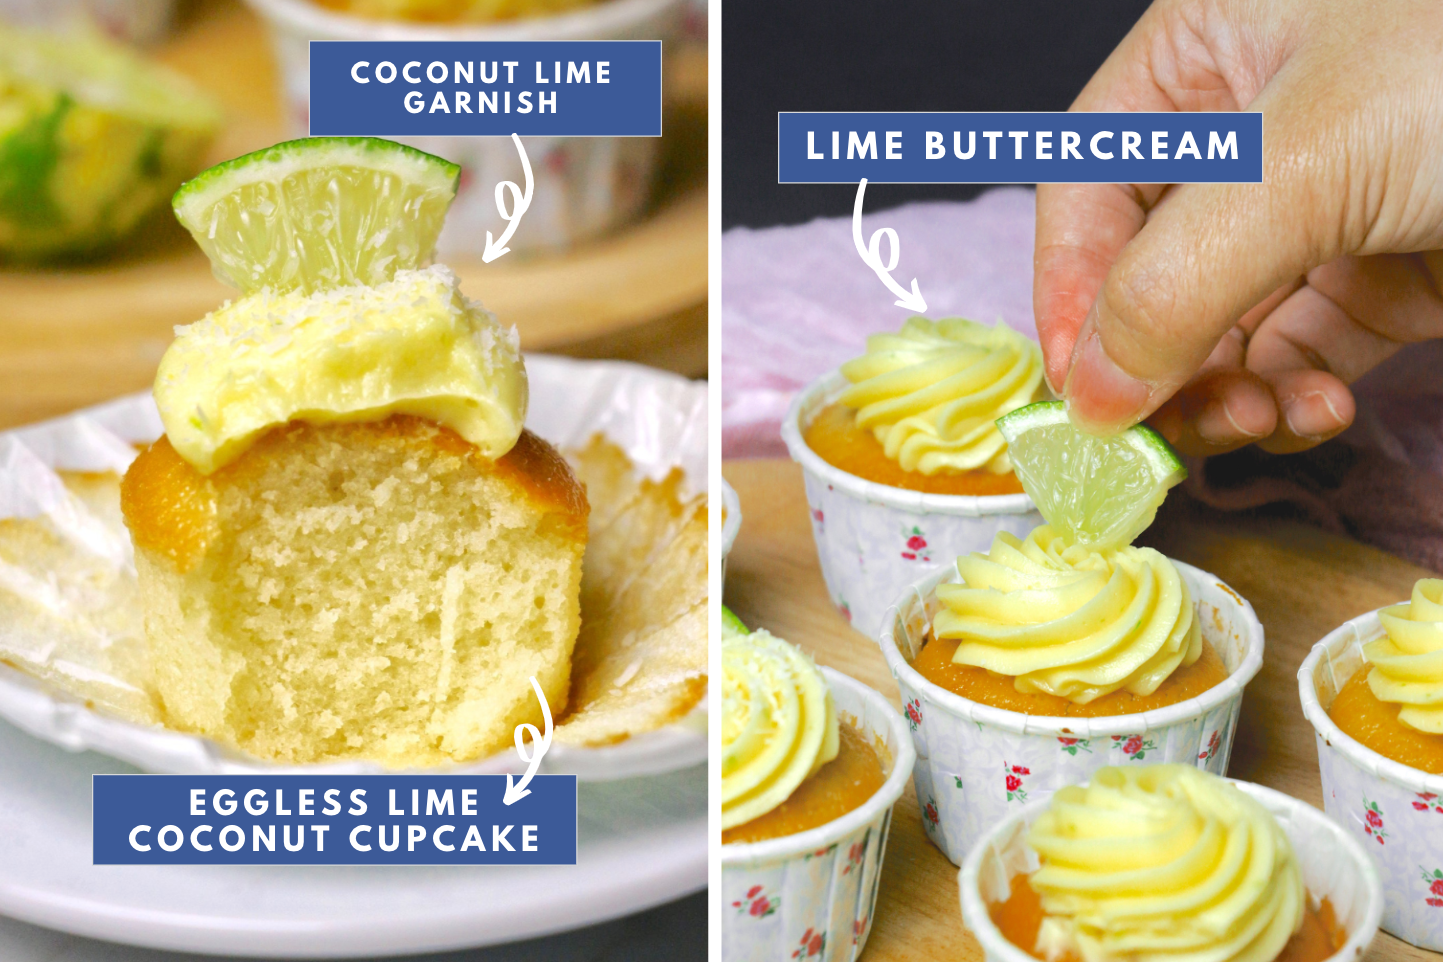 RECIPE: Get into the Summer Mood with These Eggless Lime Coconut Cupcakes!